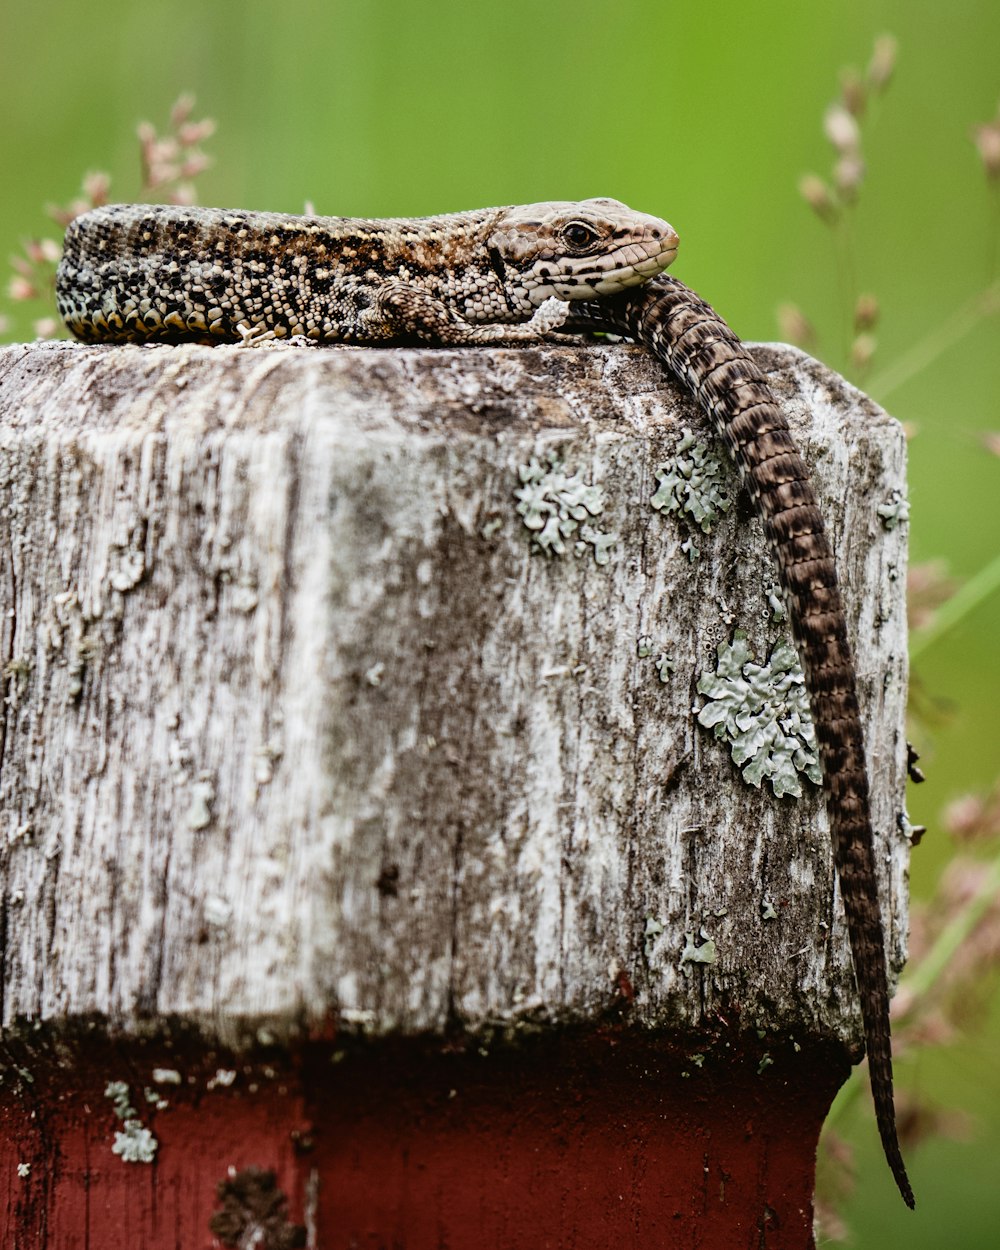 a lizard sitting on top of a wooden post